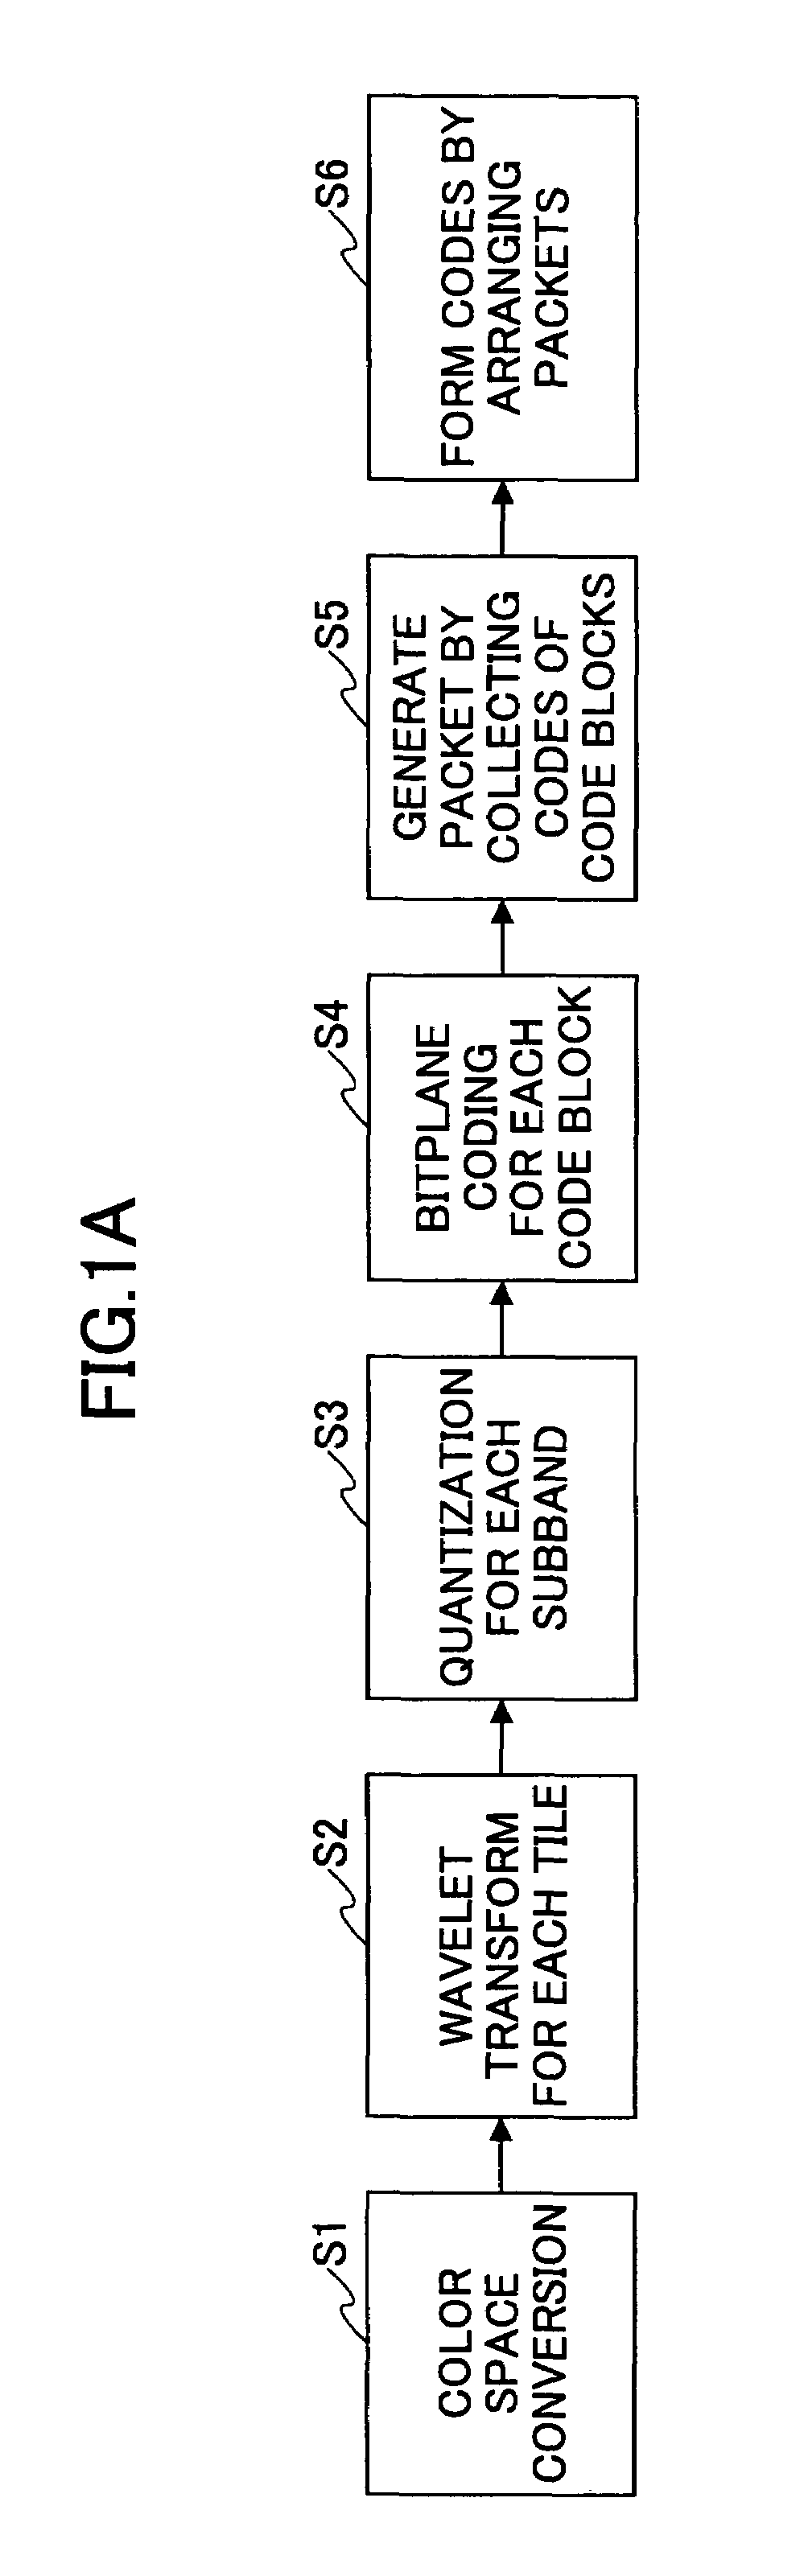 Image processing apparatus, image processing method, program, and recording medium that allow setting of most appropriate post-quantization condition